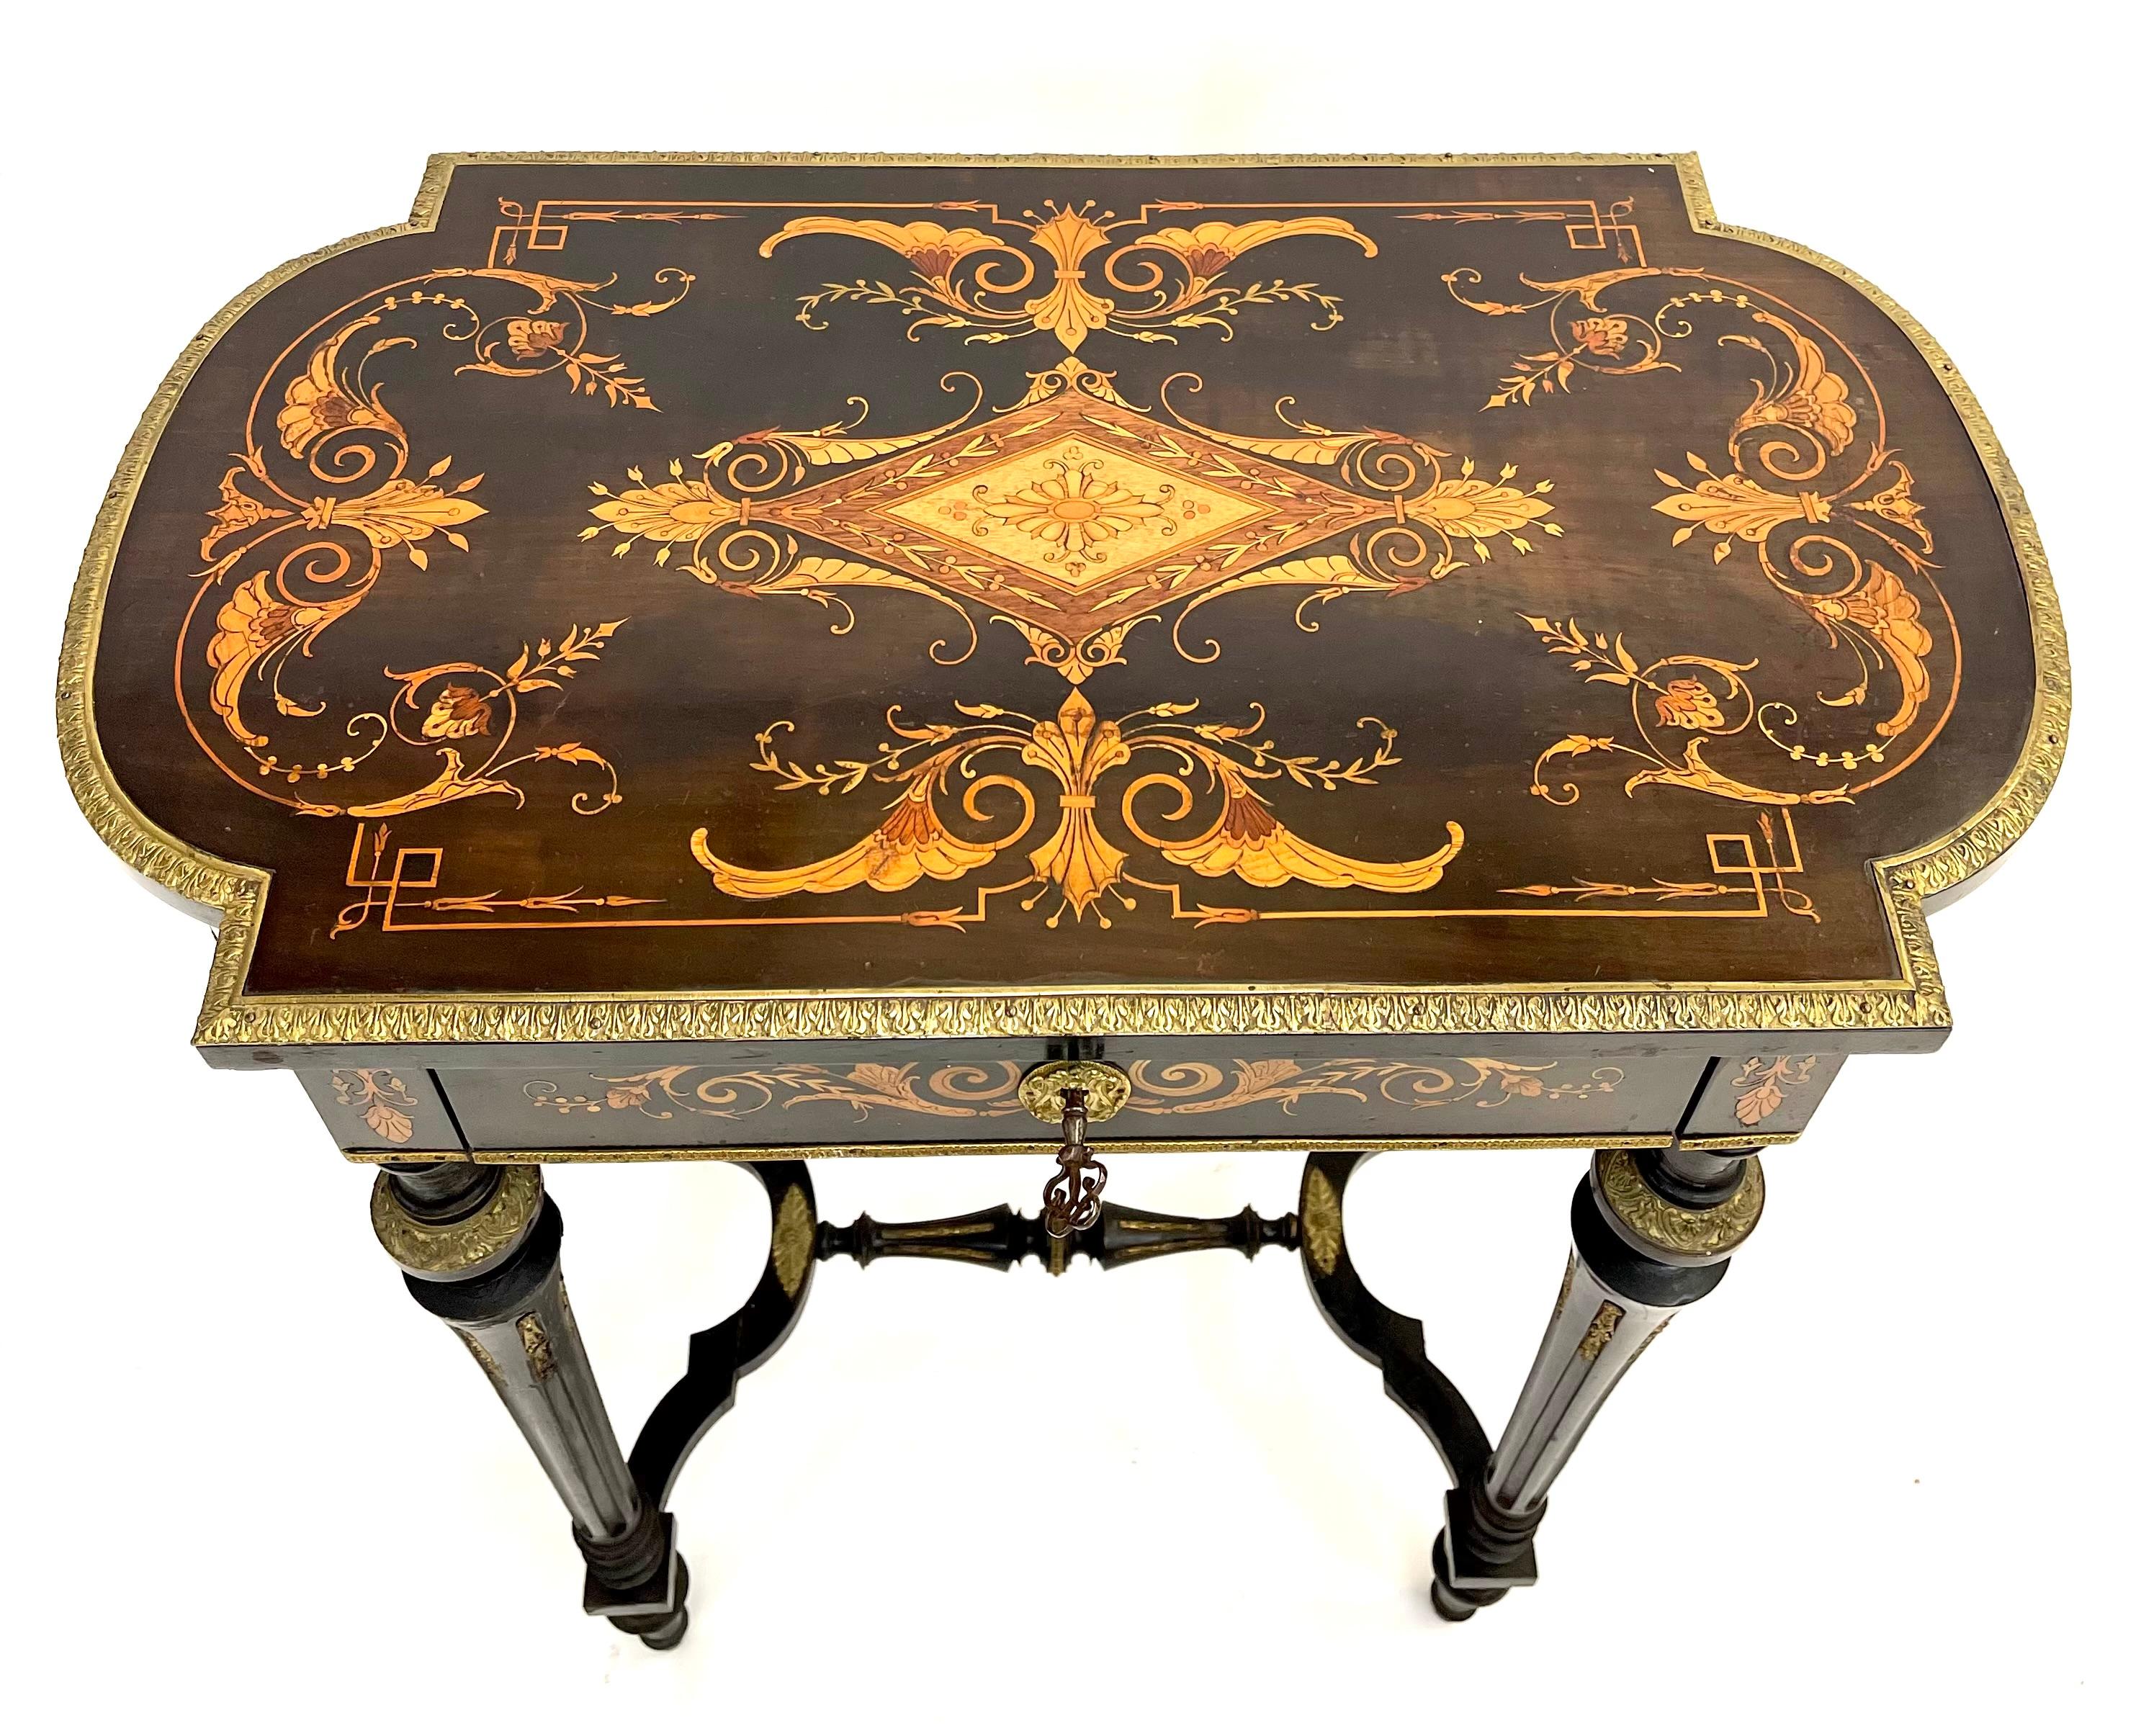 The Napoleon III marquetry side table is a true masterpiece of the Victorian era. It flawlessly combines the refinement of the period with high-quality materials.

This side table is a prime example of the Napoleon III aesthetic. The marquetry is